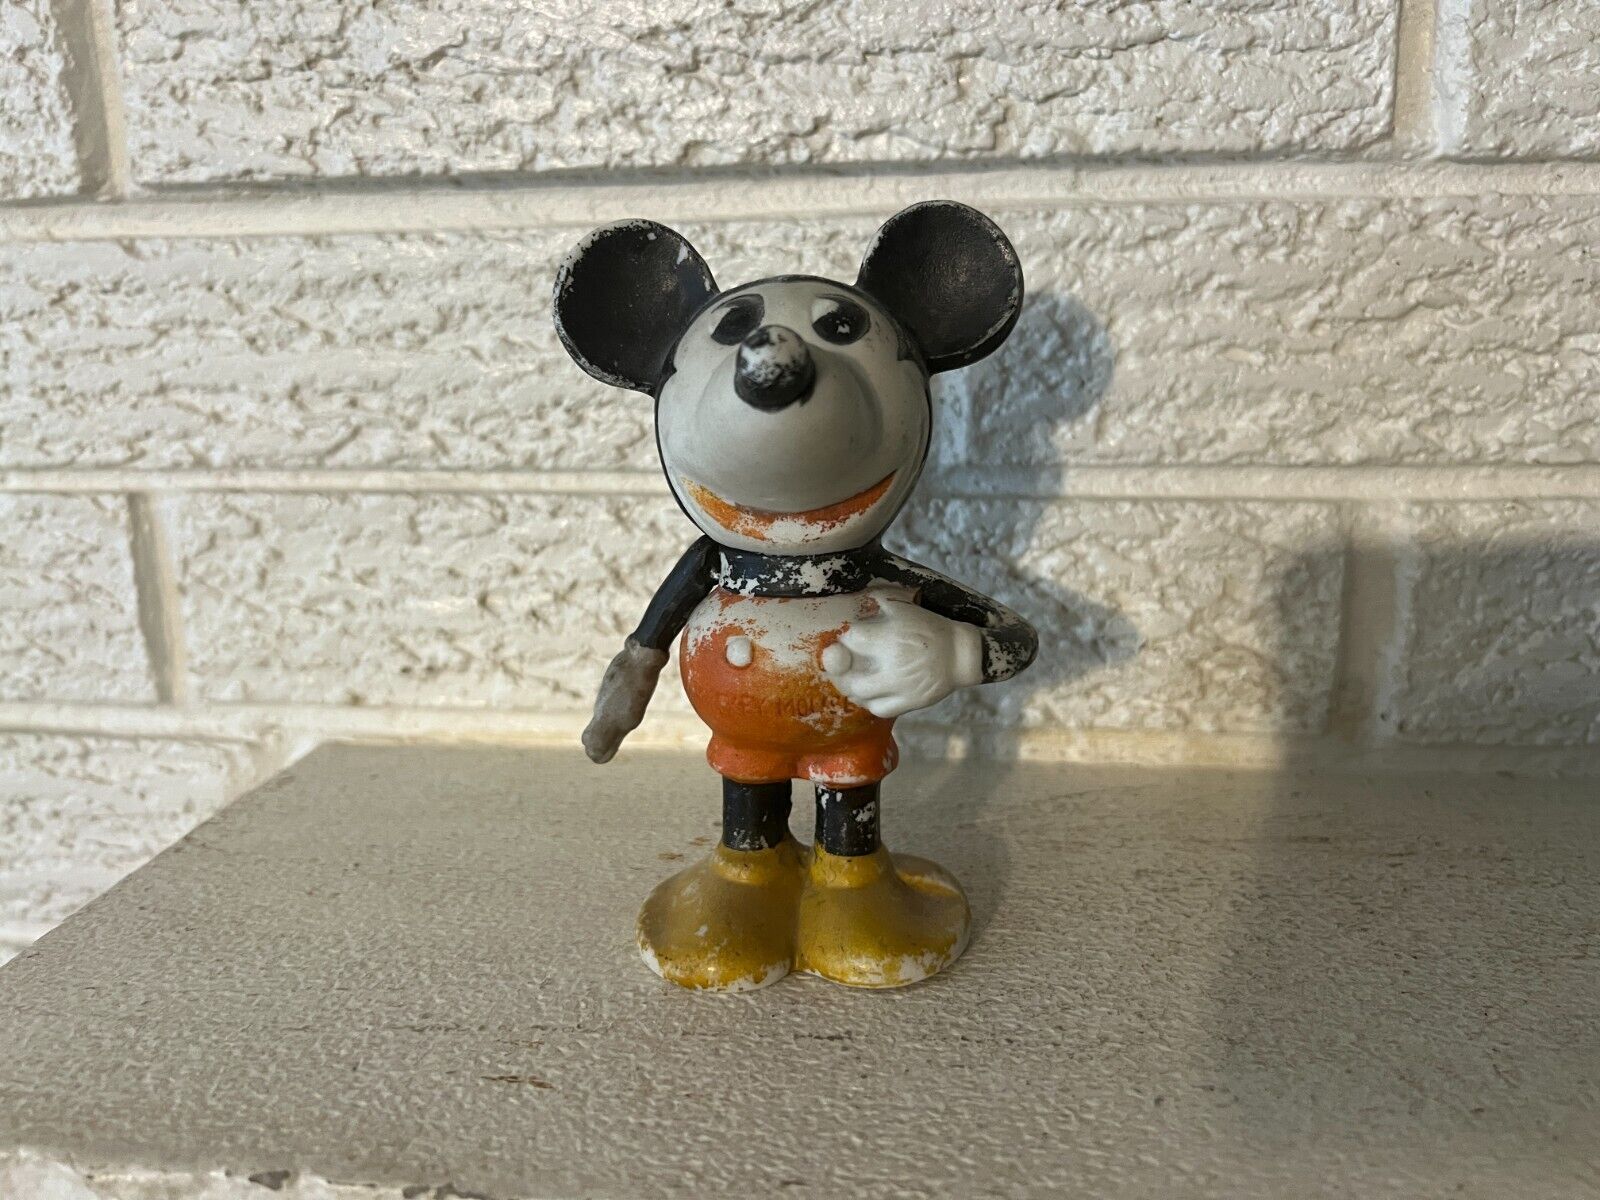 1930S MICKEY MOUSE - BISQUE TOOTHBRUSH HOLDER W JOINTED ARM - WALT DISNEY